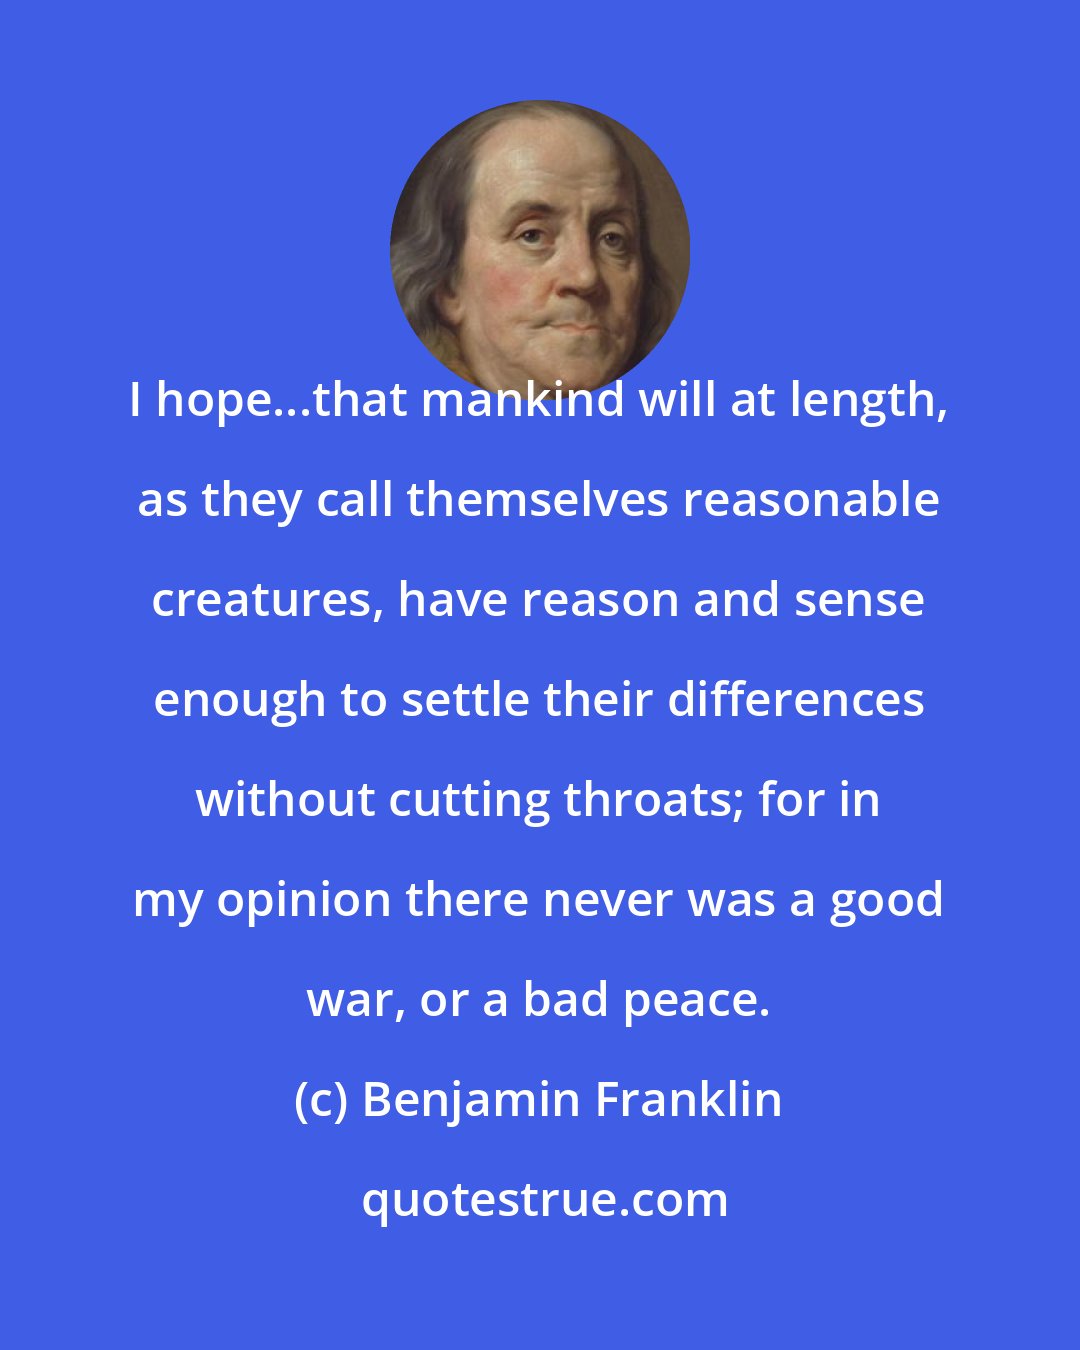 Benjamin Franklin: I hope...that mankind will at length, as they call themselves reasonable creatures, have reason and sense enough to settle their differences without cutting throats; for in my opinion there never was a good war, or a bad peace.